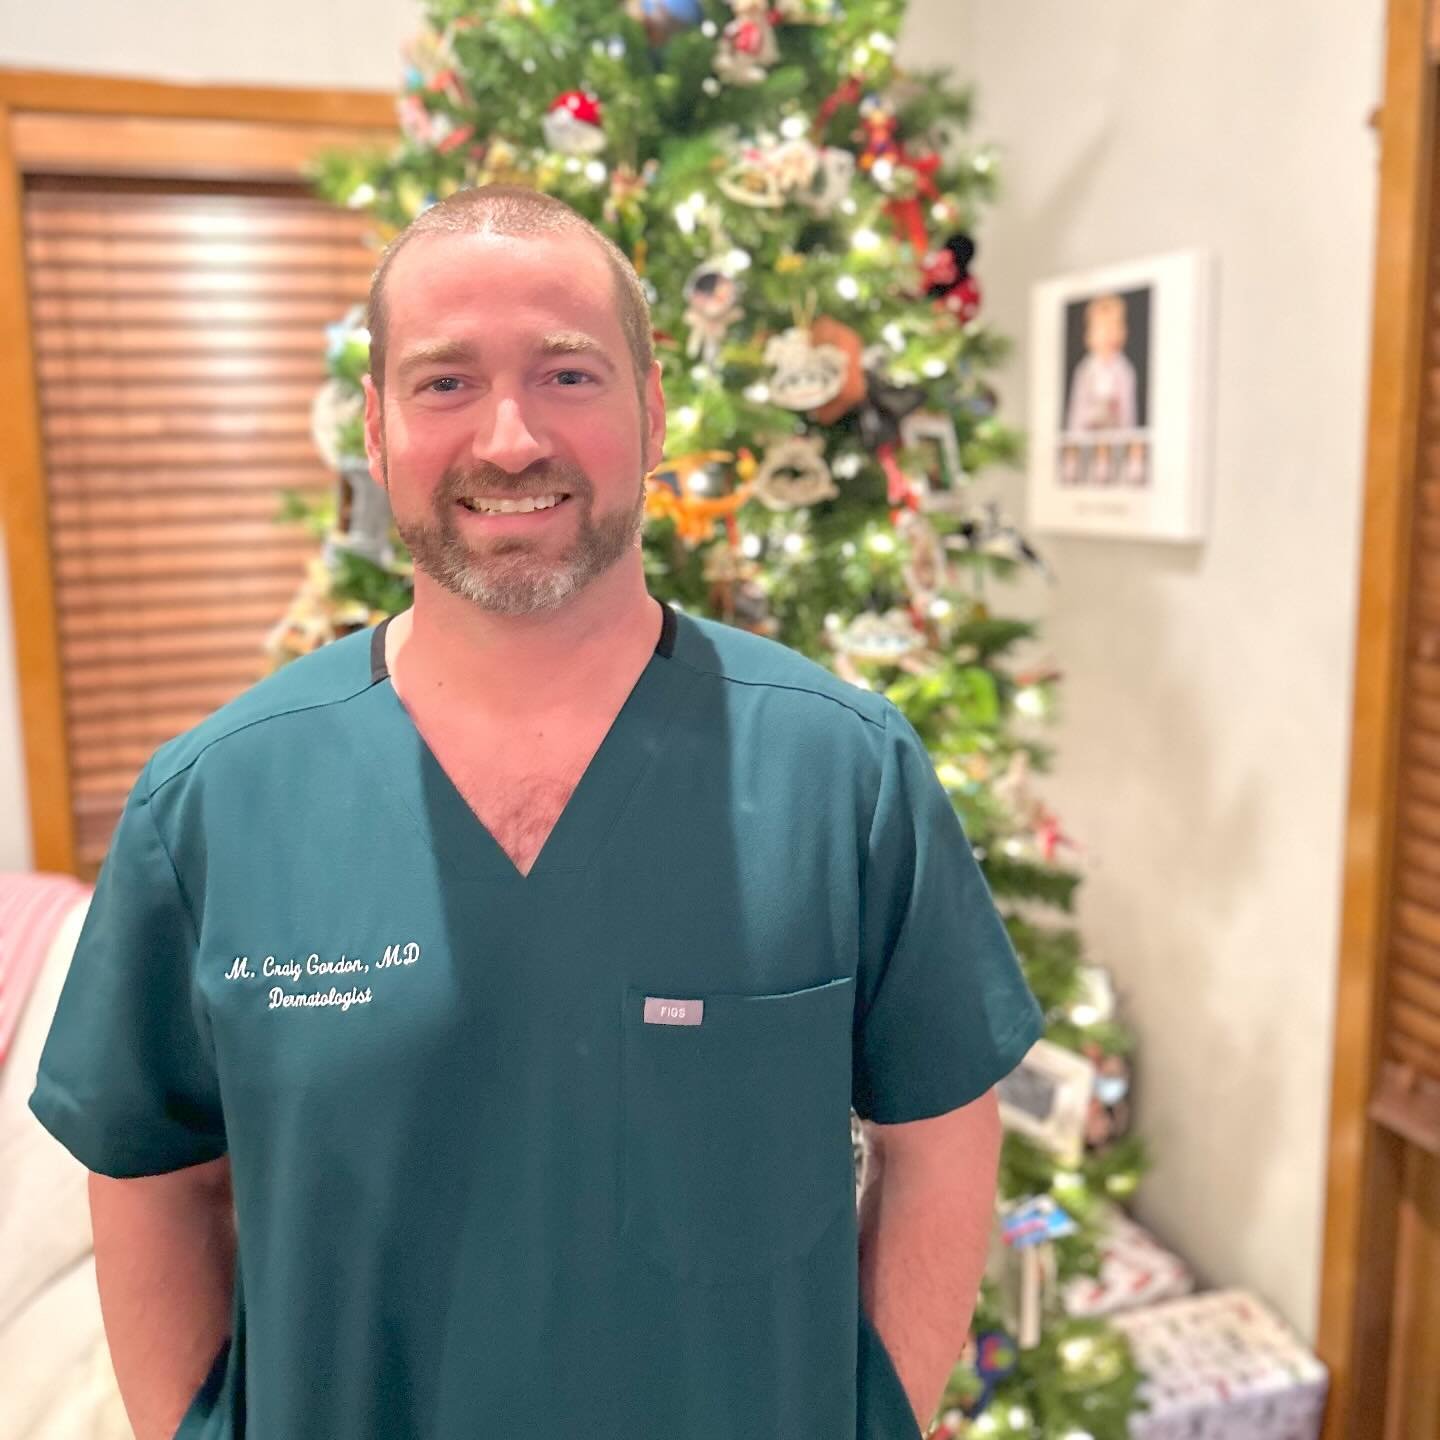 I&rsquo;m so happy for this guy! He finished his first week at @levydermatology_md and loves it. Life is too short to be unhappy. 

#derm #dermatology #dermatologist #levydermatology #mayoclinic #skincare #behappy #newbeginnings